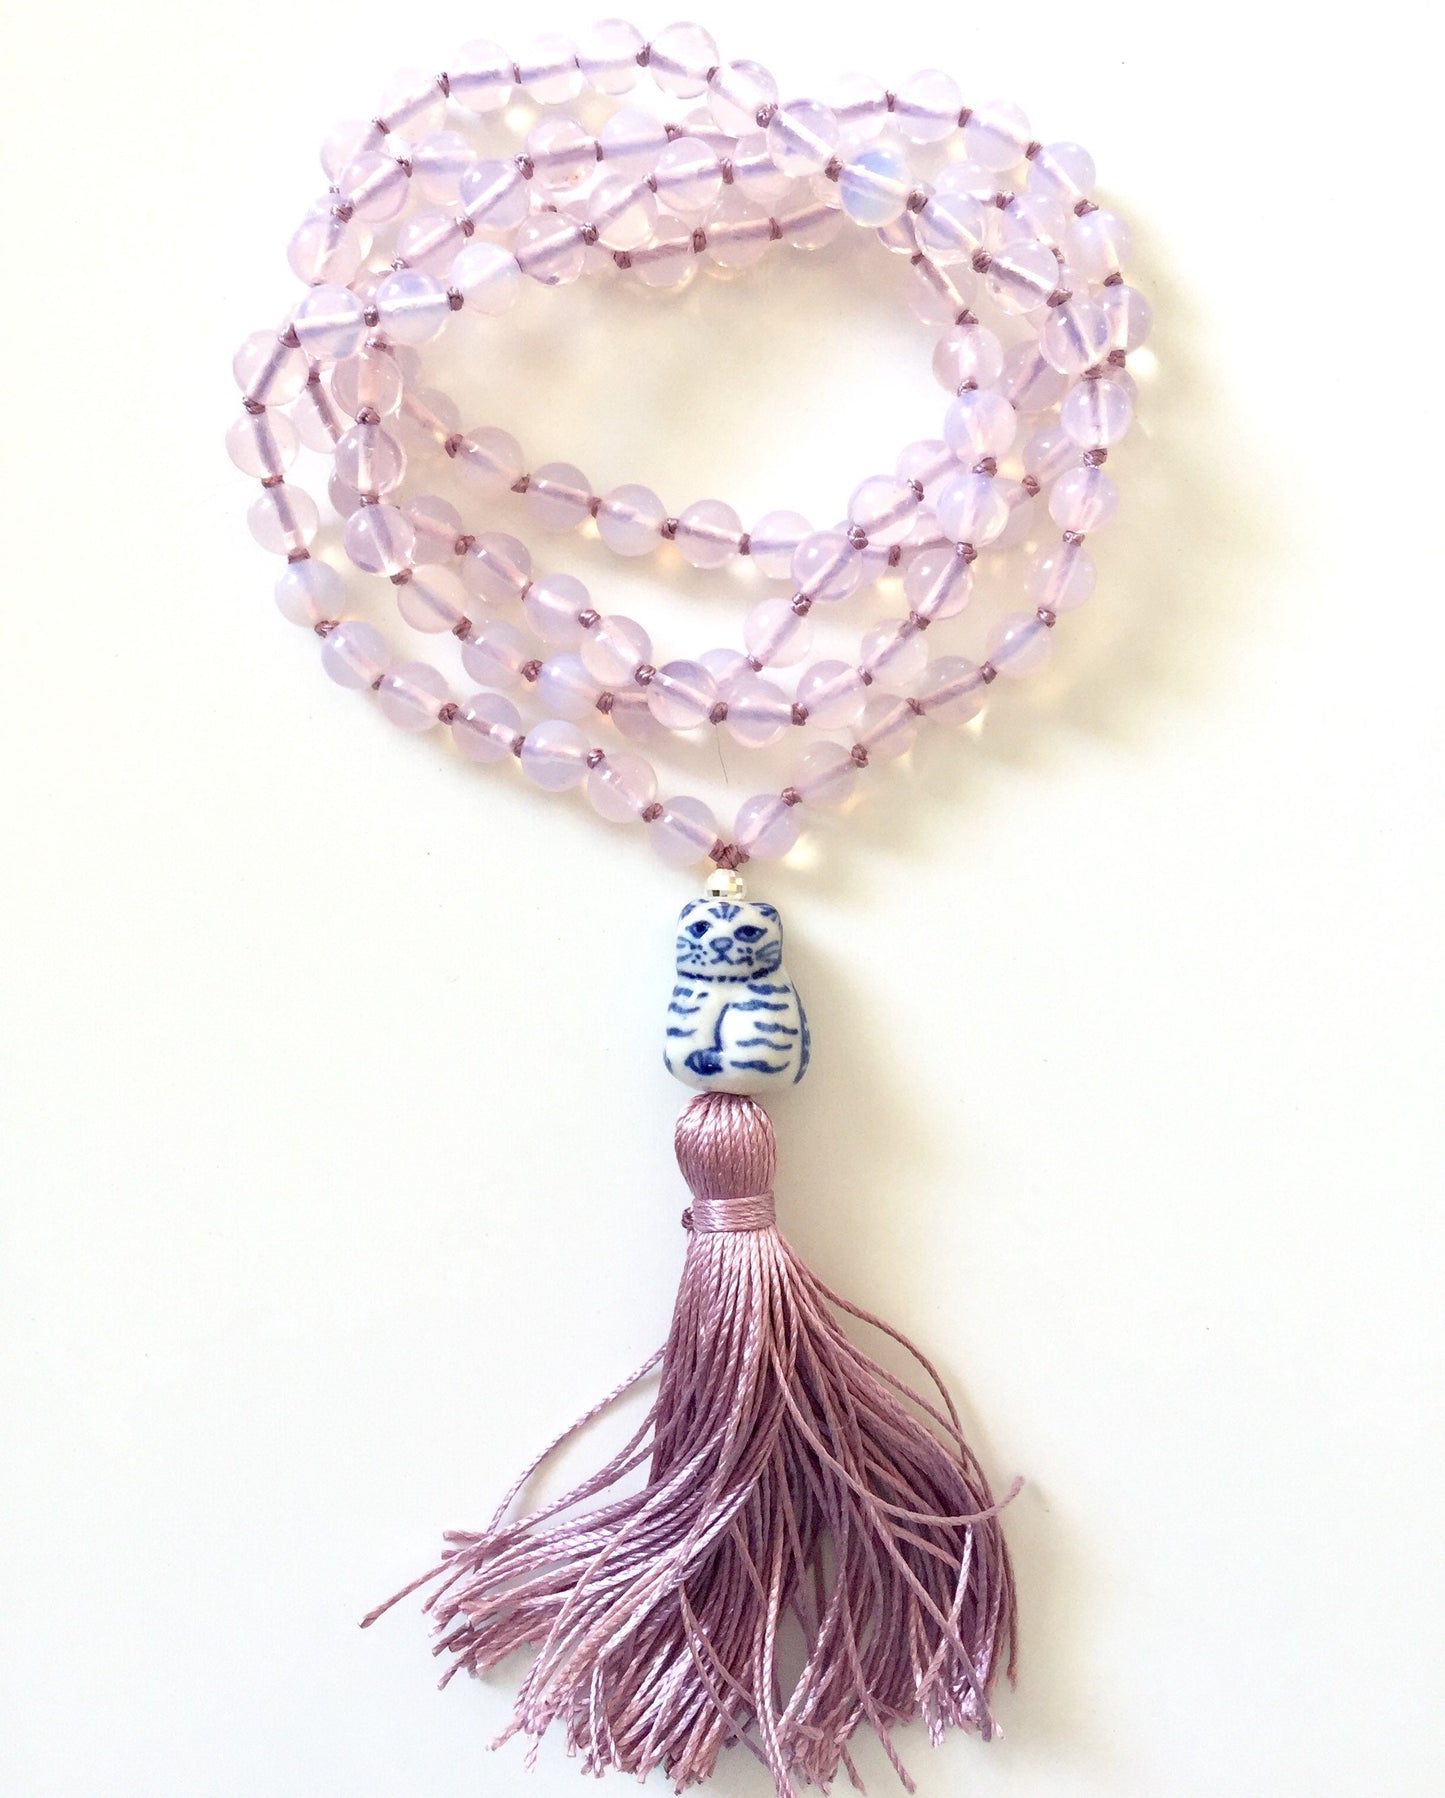 Opalite Mala Necklace with blue and white ceramic cat guru bead and lavender tassel